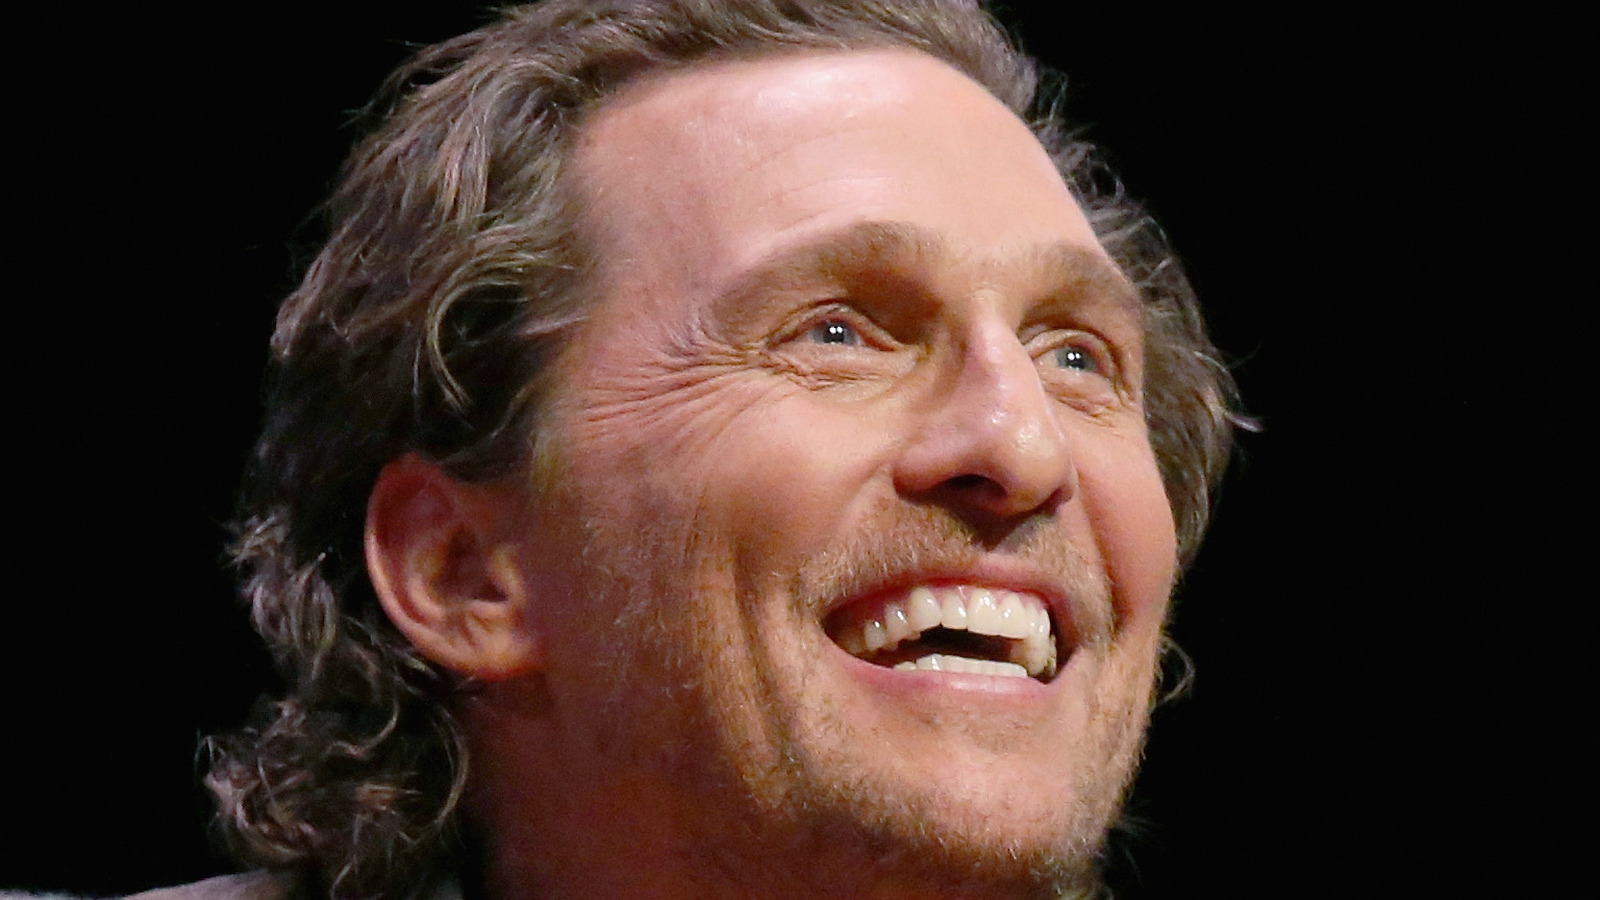 What You Don't Know About Matthew McConaughey - Celeb 99